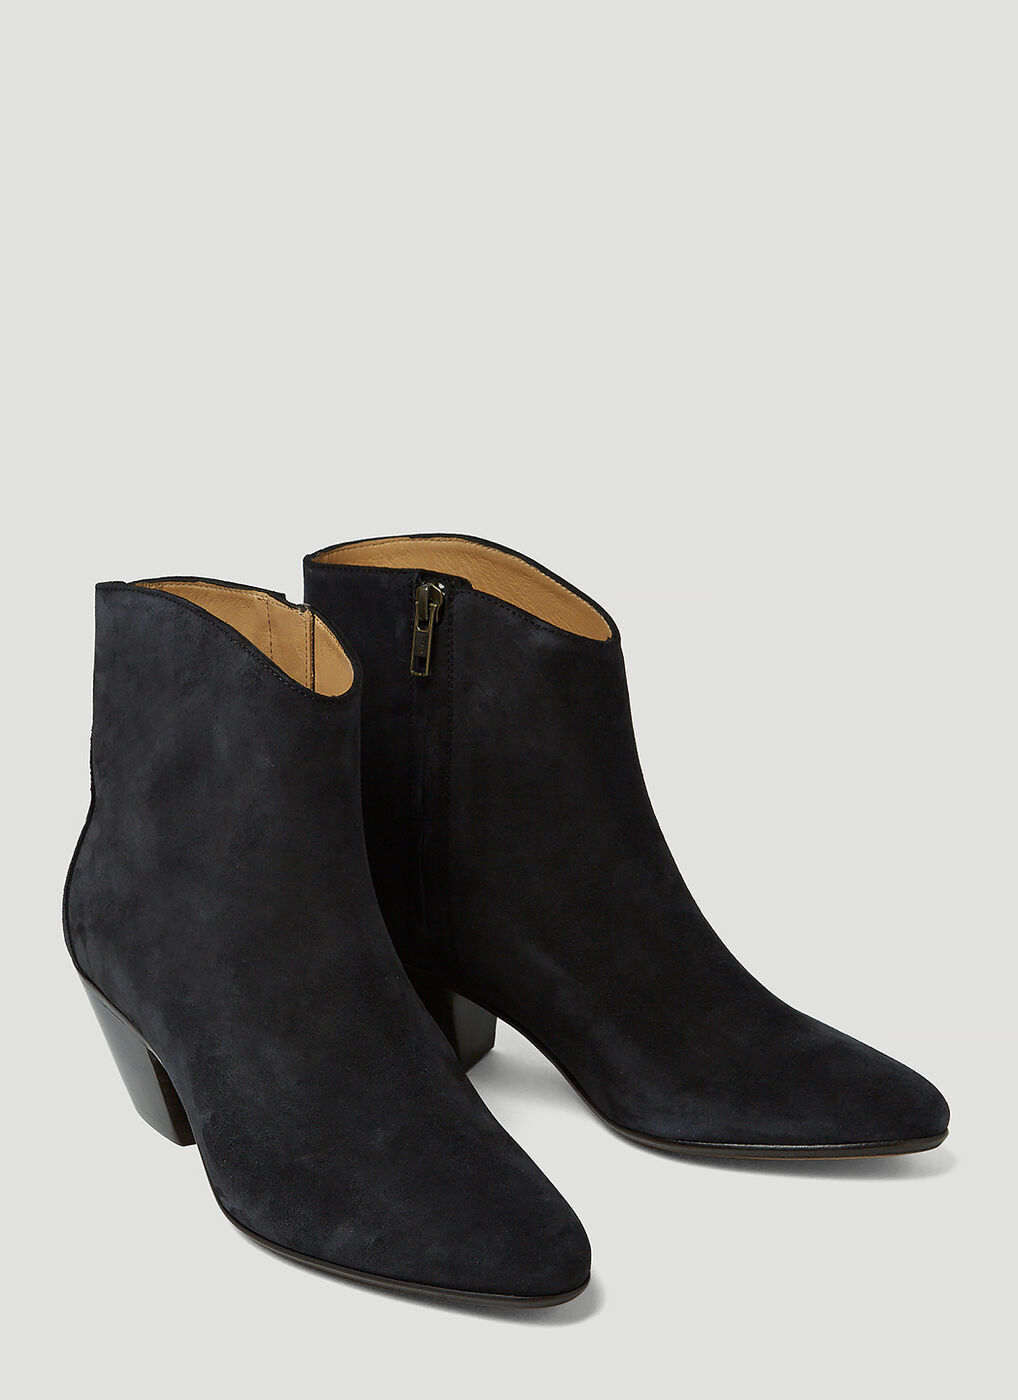 Dacken Ankle Boots in Black